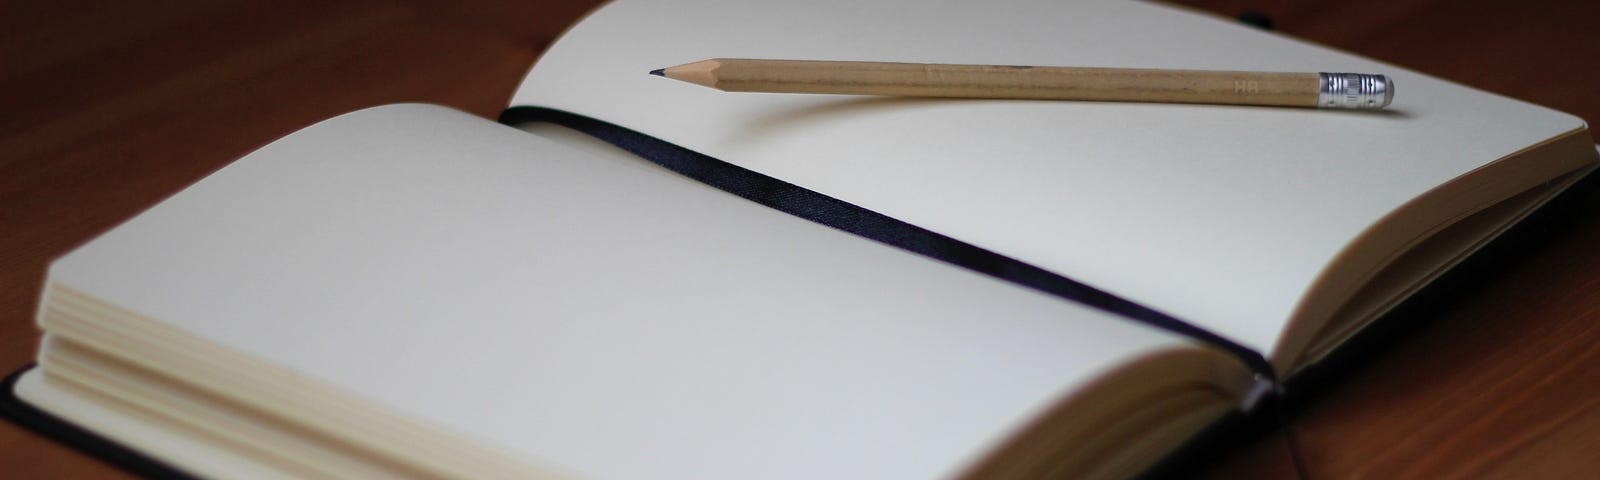 Photo of an open blank journal and penicl on a desk